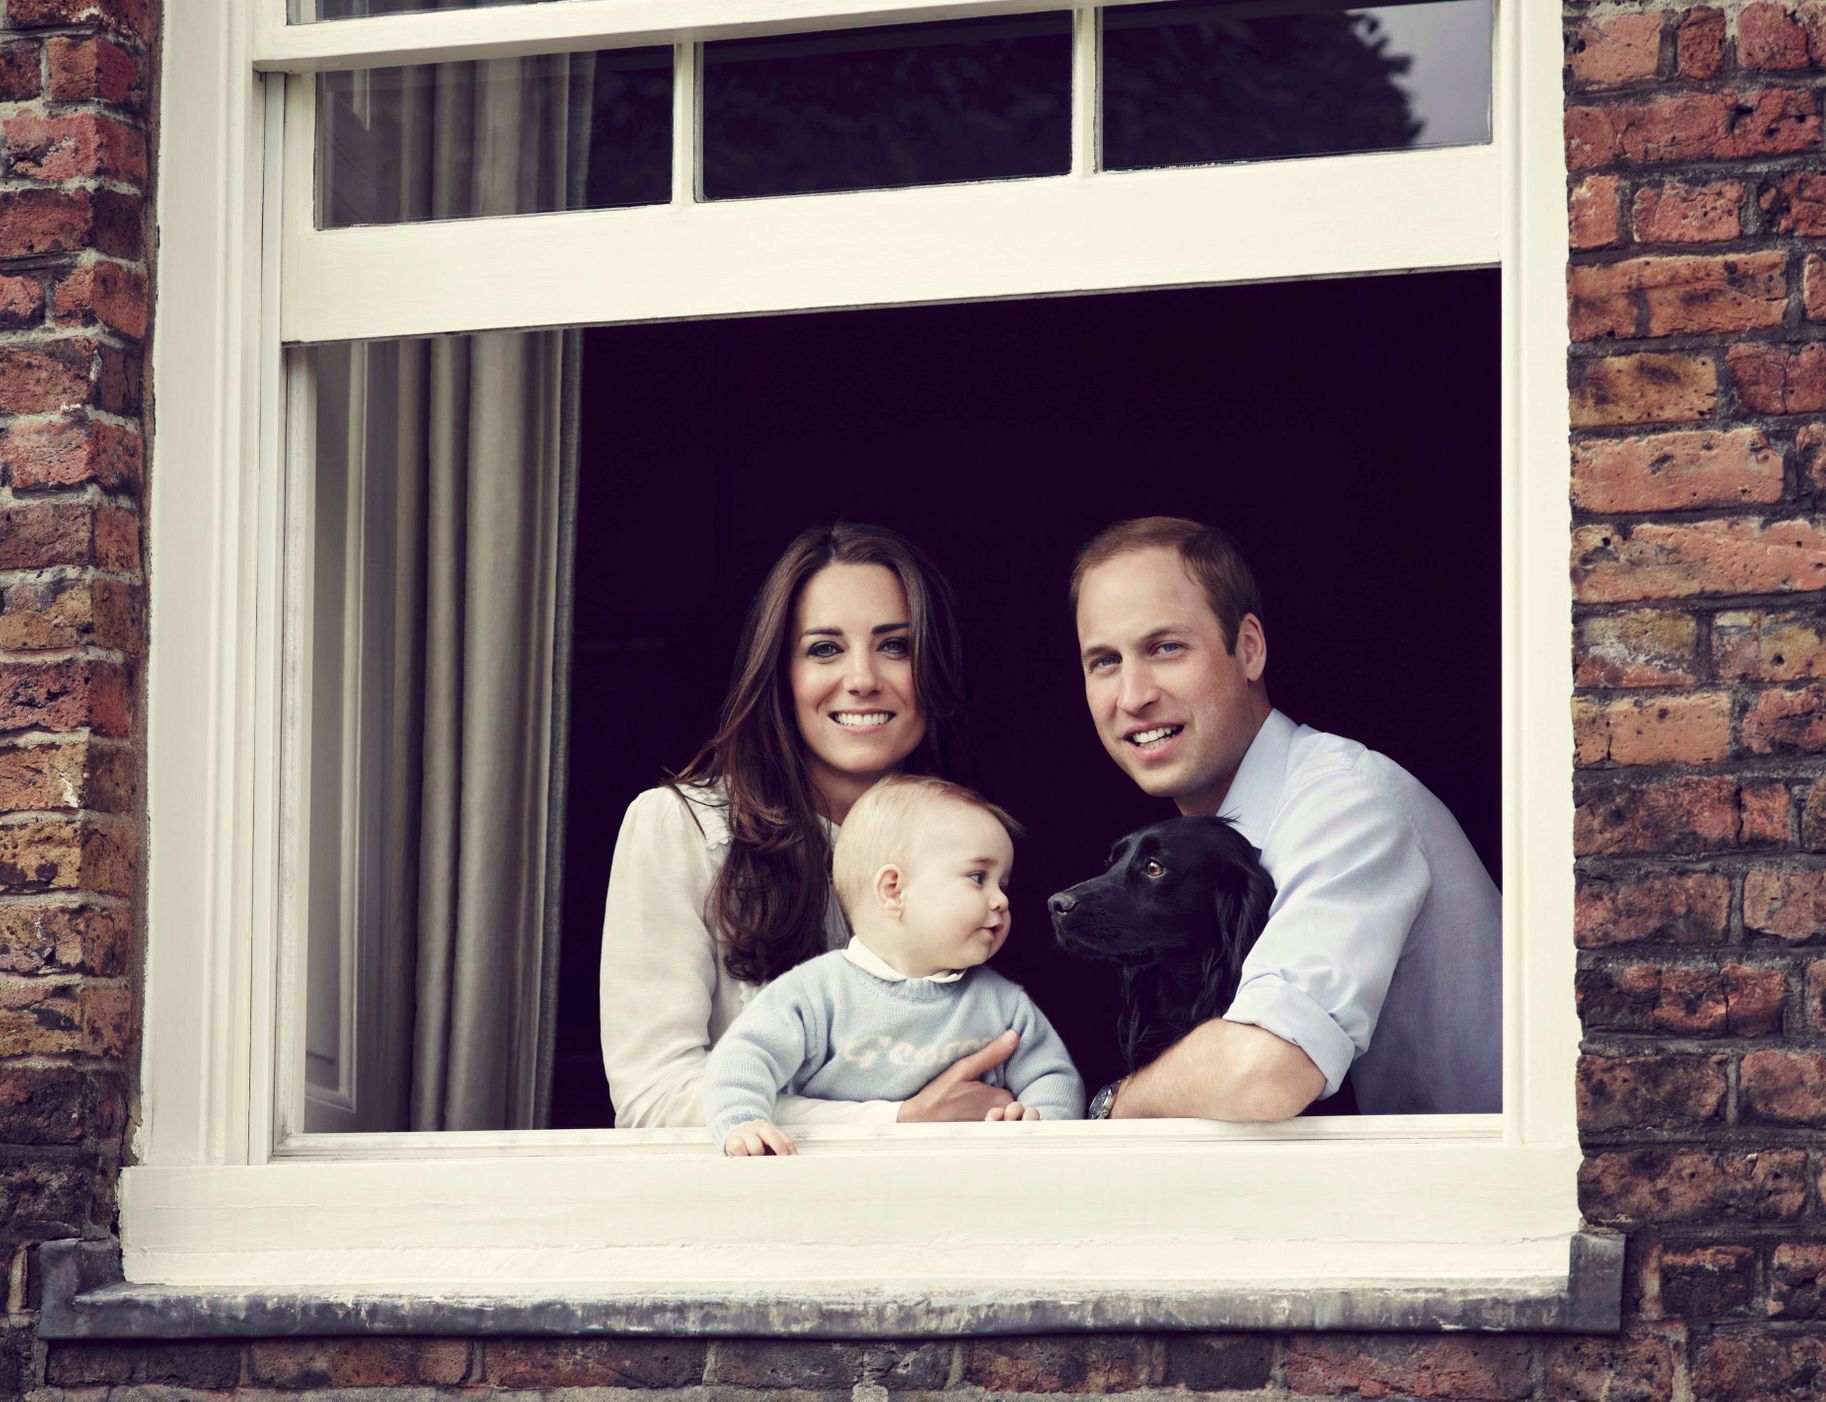 Britain's Prince William, Catherine, Duchess of Cambridge and their son Prince George, are seen in this photograph taken in Kensington Palace, London